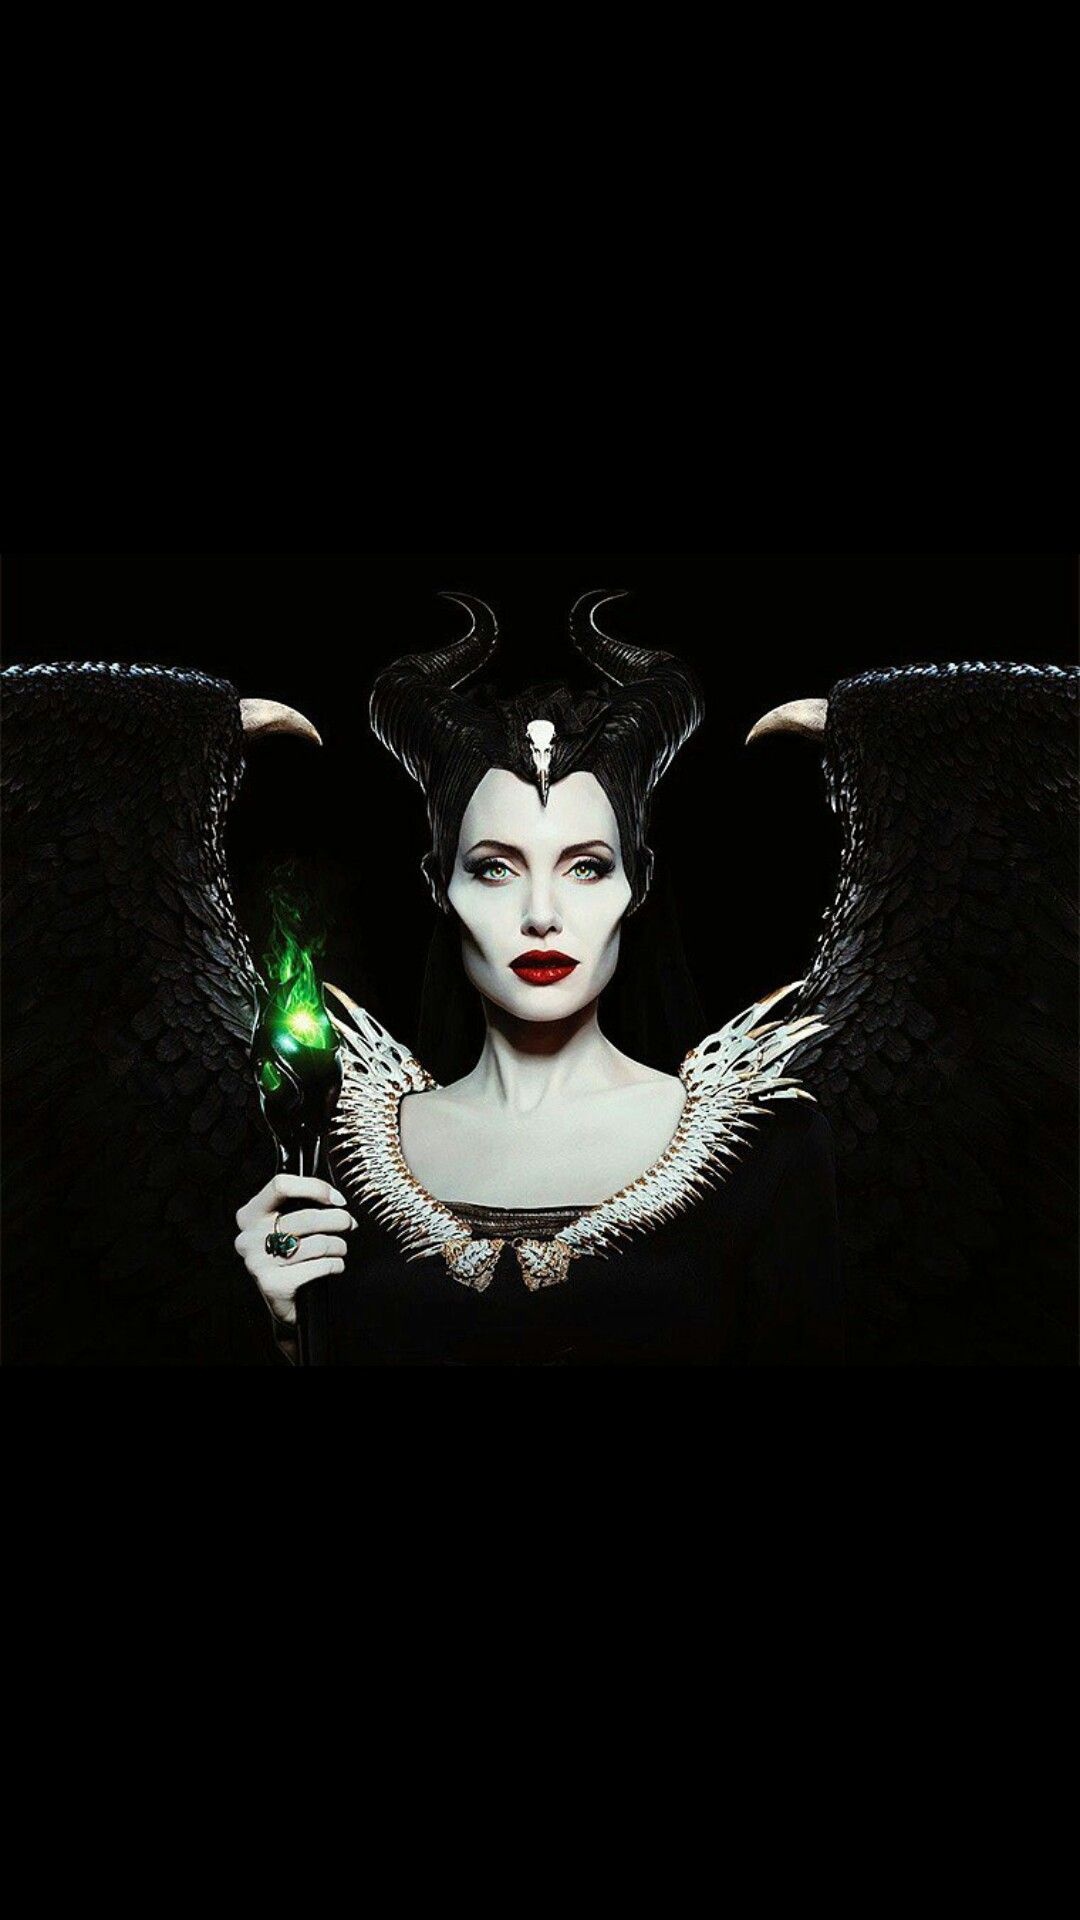 Maleficent reference photos, Disney Maleficent, Angelina Jolie, Maleficent, 1080x1920 Full HD Phone